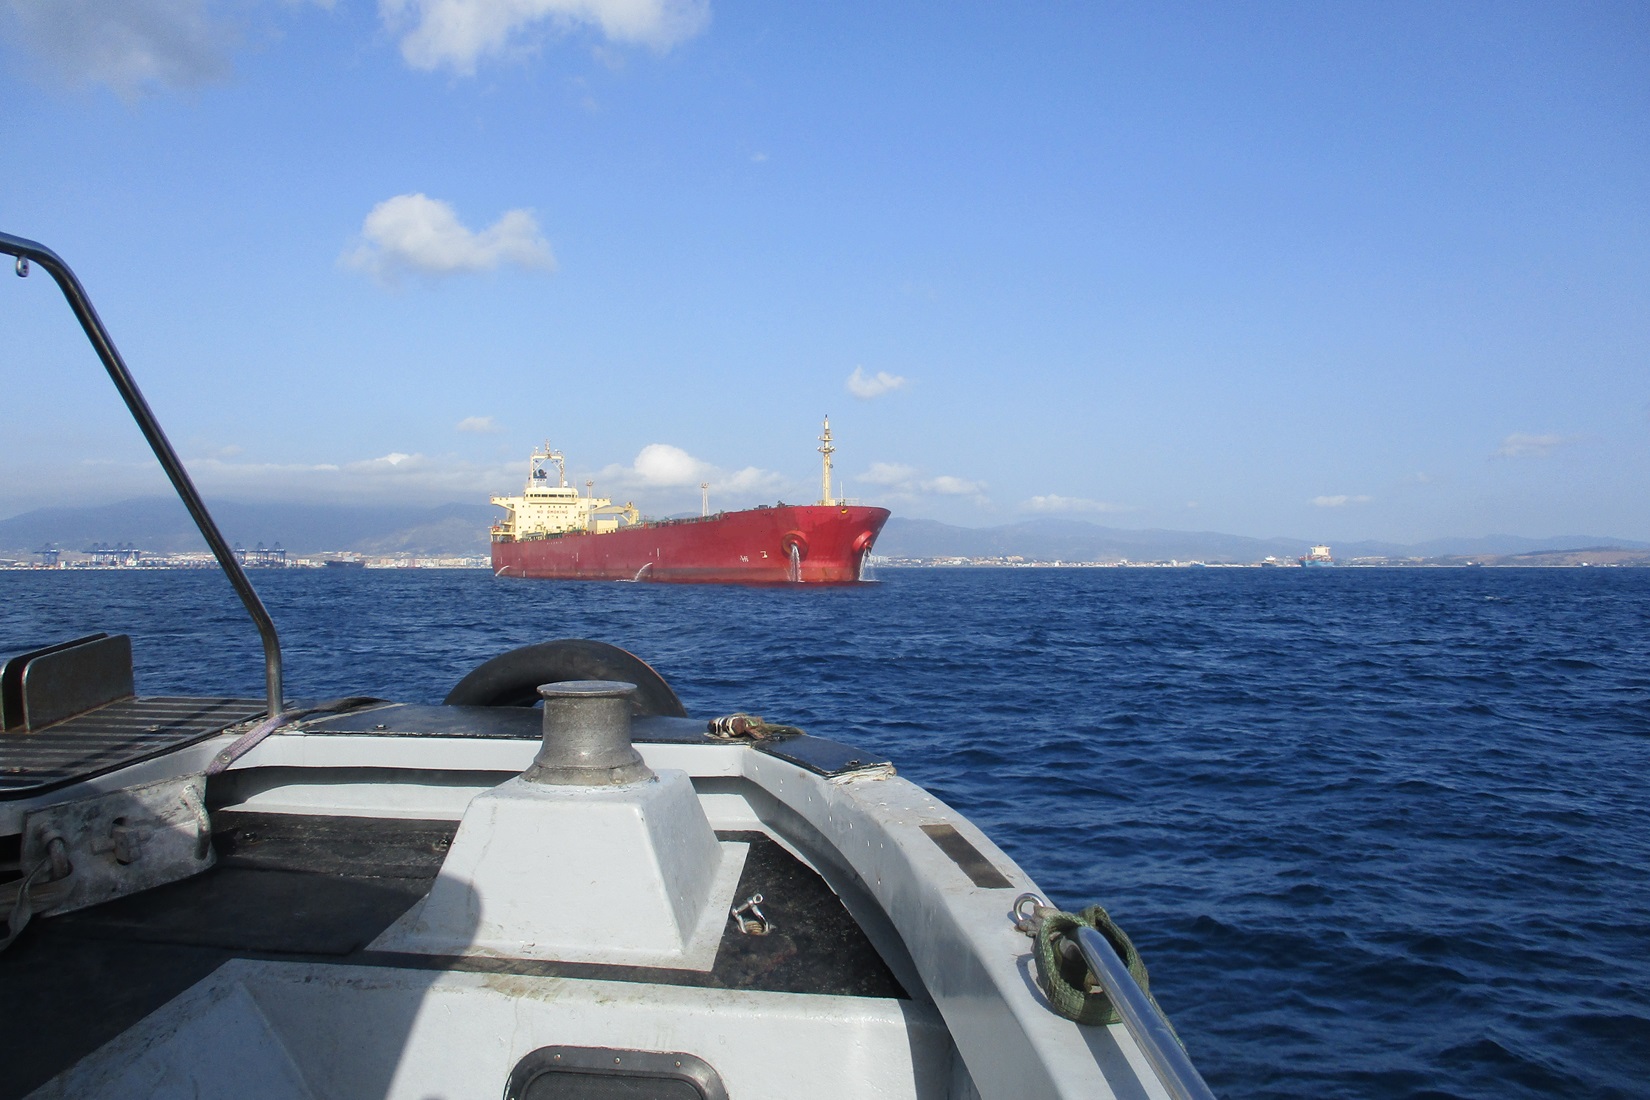 ship-inspection-services-marine-surveys-consulting-spain